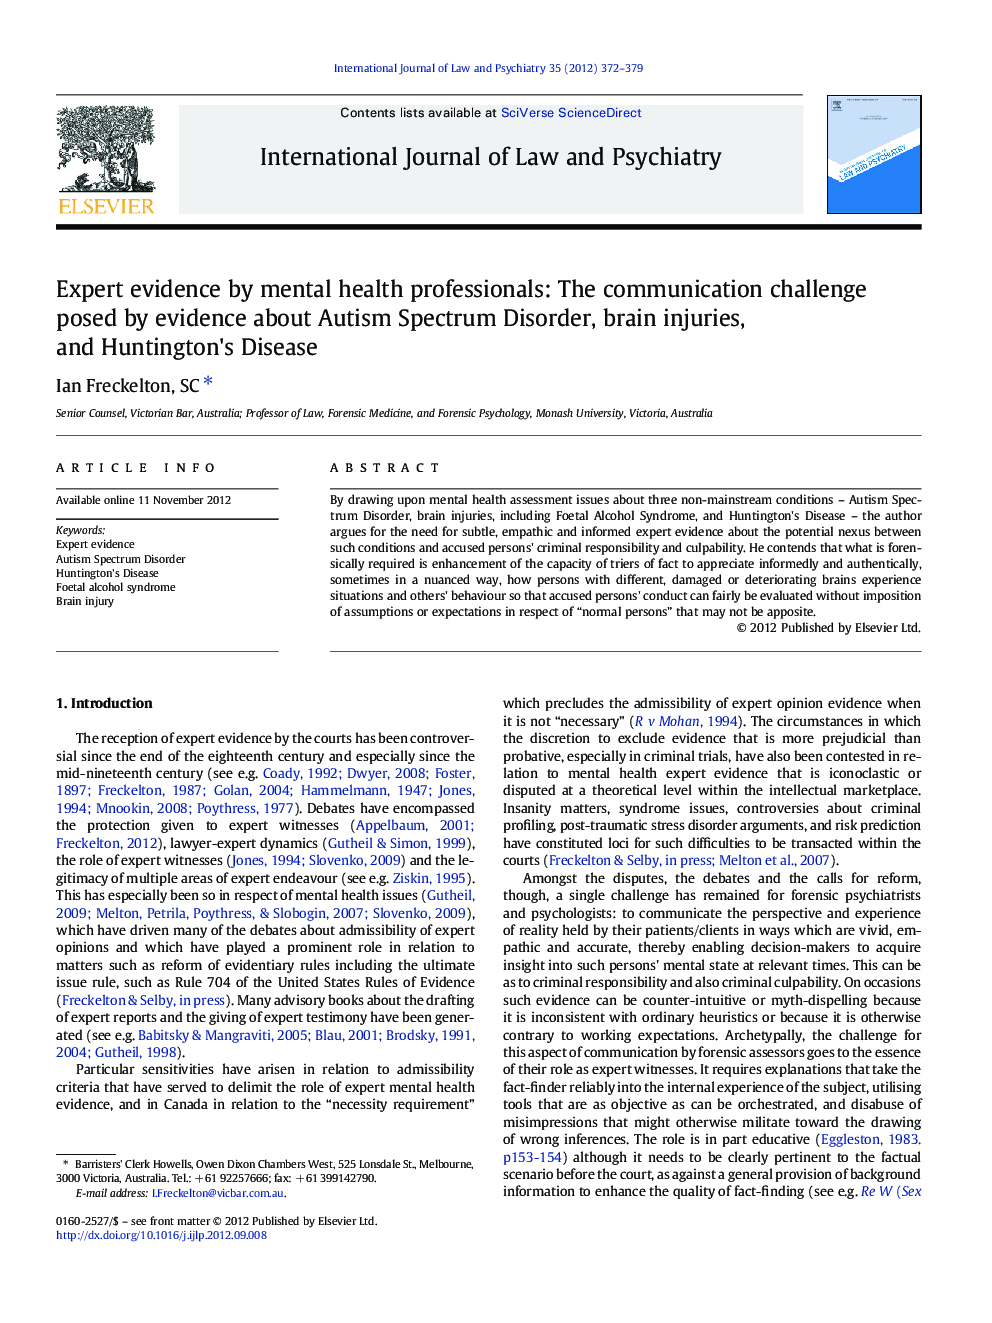 Expert evidence by mental health professionals: The communication challenge posed by evidence about Autism Spectrum Disorder, brain injuries, and Huntington's Disease